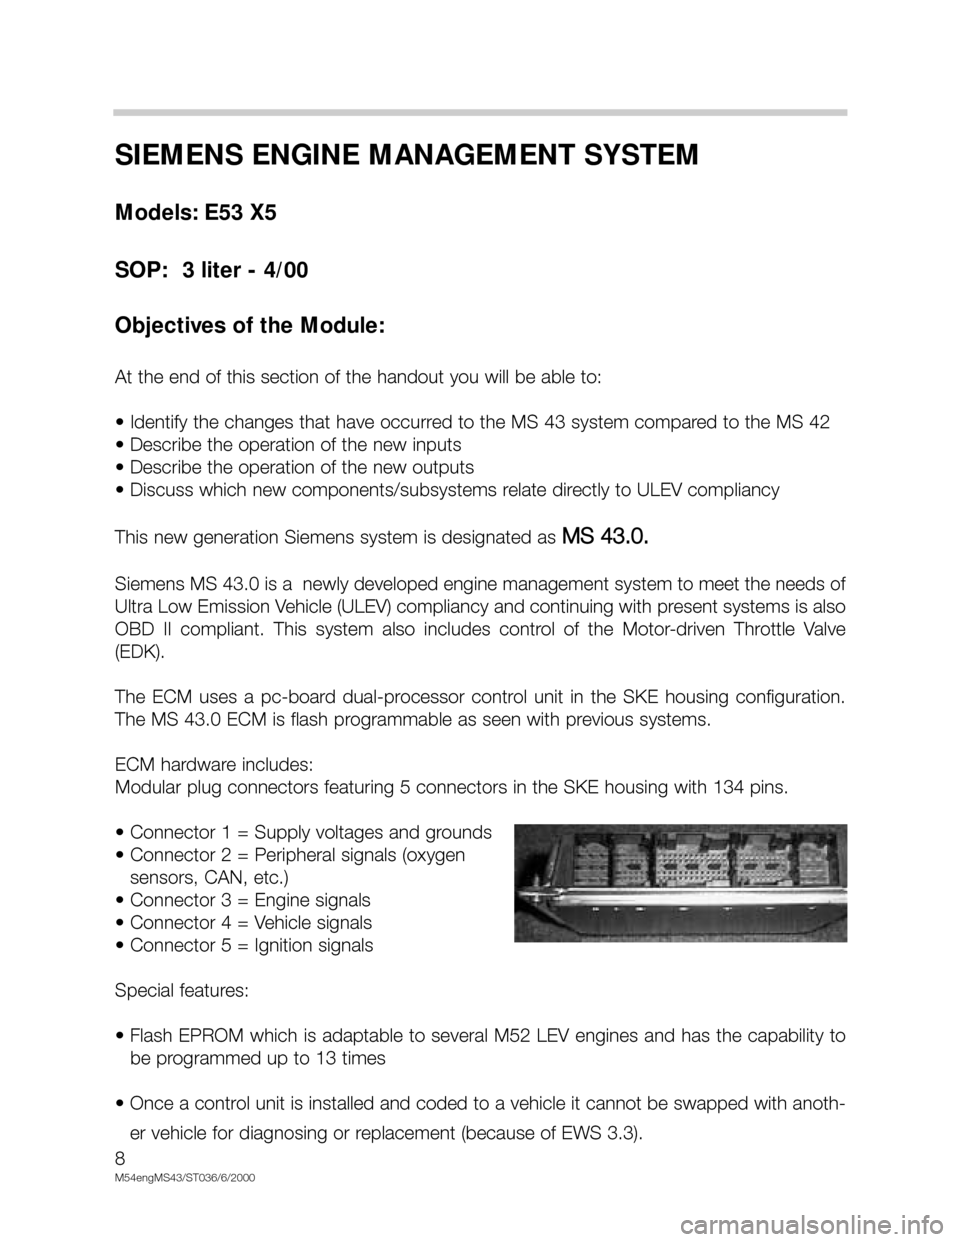 BMW X5 2001 E53 M54 Engine Workshop Manual 8
M54engMS43/ST036/6/2000
SIEMENS ENGINE MANAGEMENT SYSTEM
Models: E53 X5
SOP:  3 liter - 4/00
Objectives of the Module:
At the end of this section of the handout you will be able to:
• Identify the